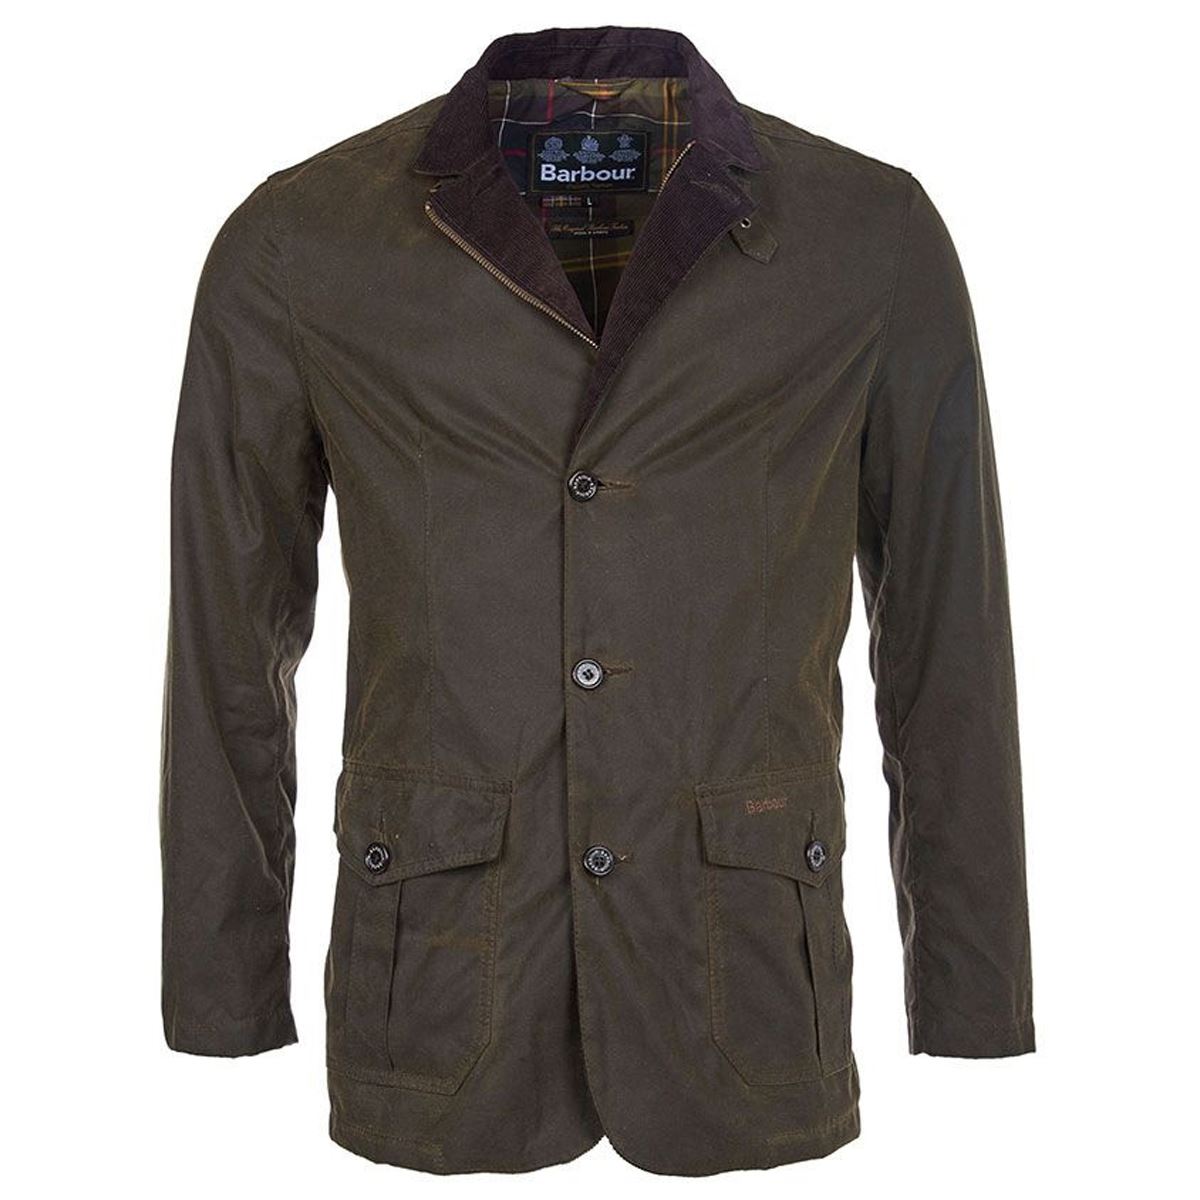 What is the purpose of the Barbour Lutz Wax Jacket in the context of the "Barbour Mens Lutz Wax Jacket"?